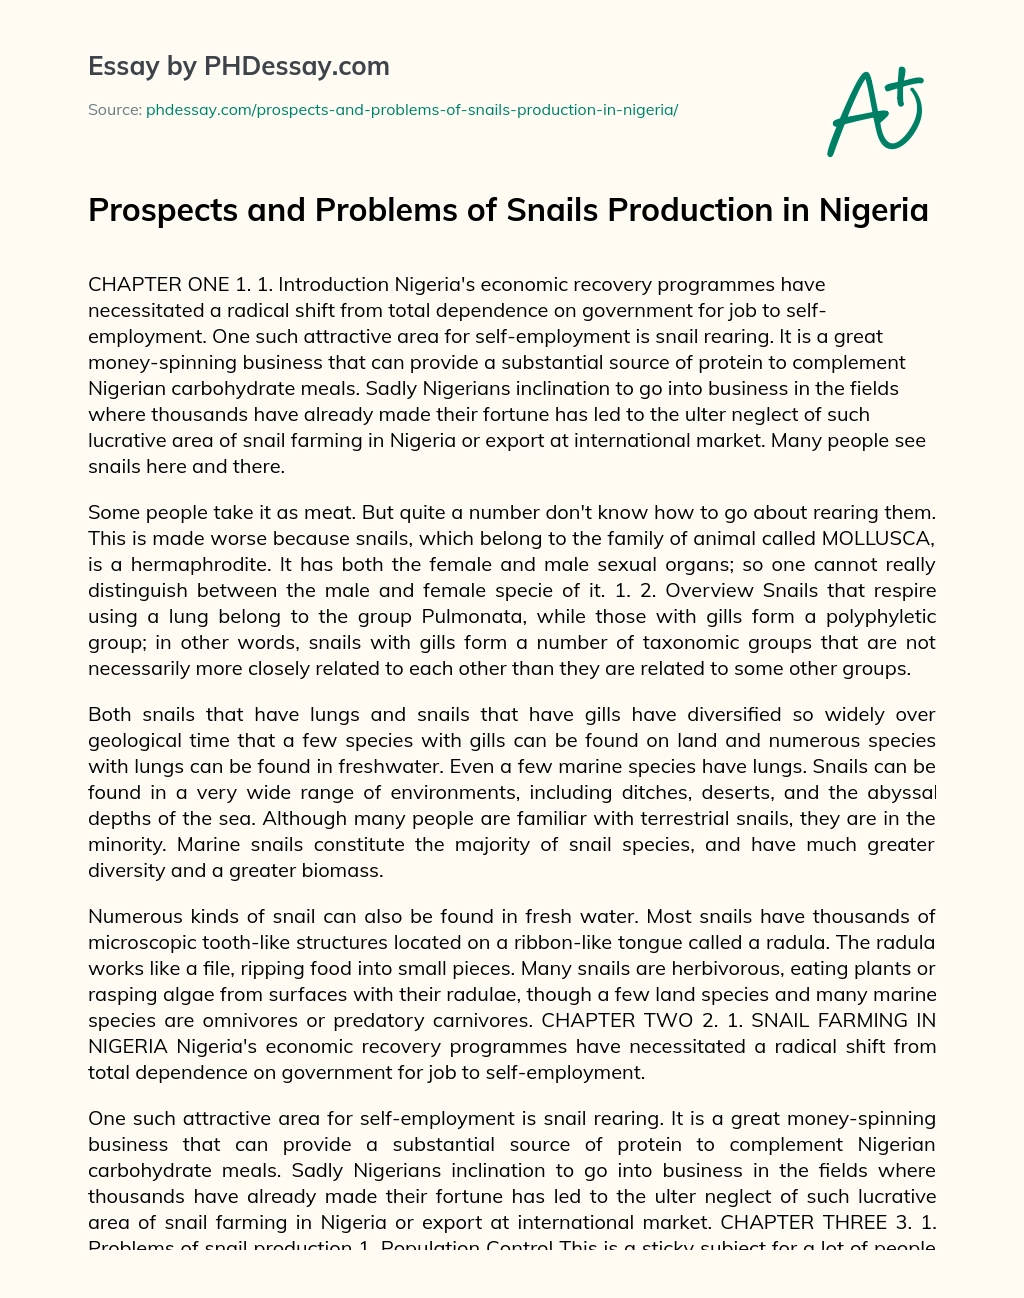 Prospects and Problems of Snails Production in Nigeria essay